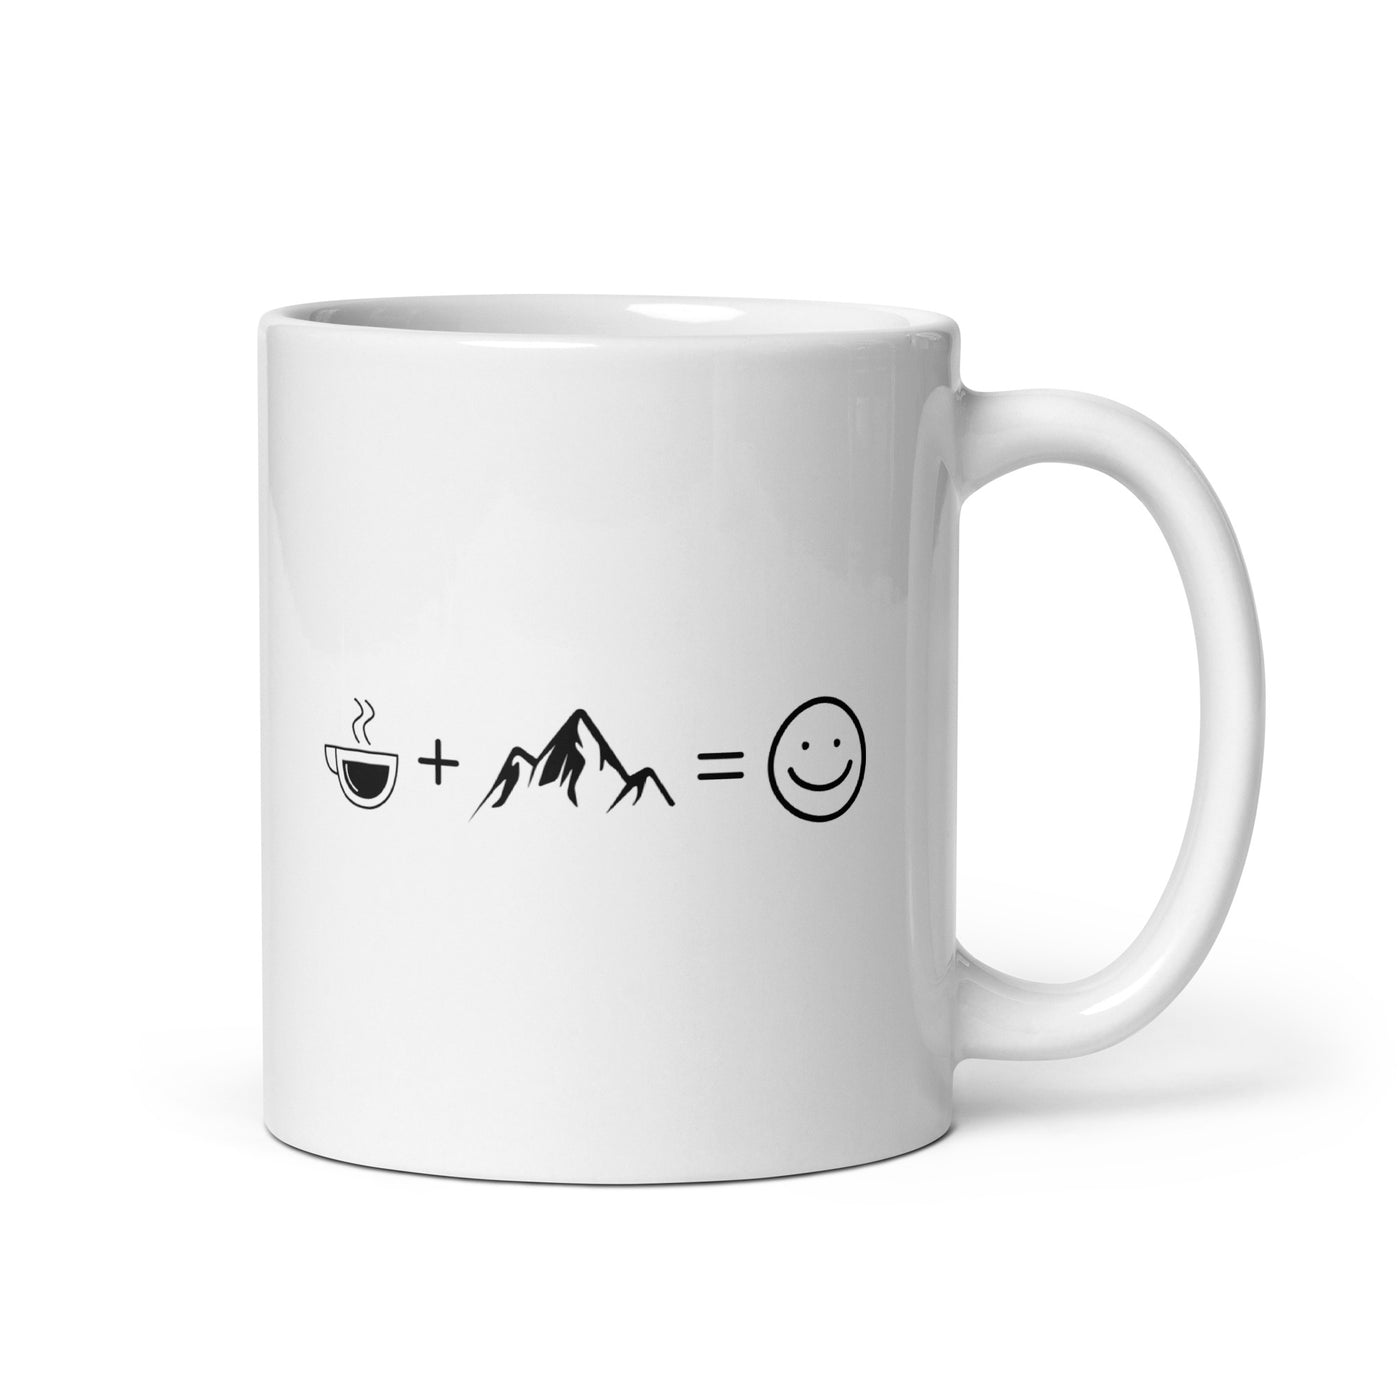 Coffee Smile Face And Mountain - Tasse berge